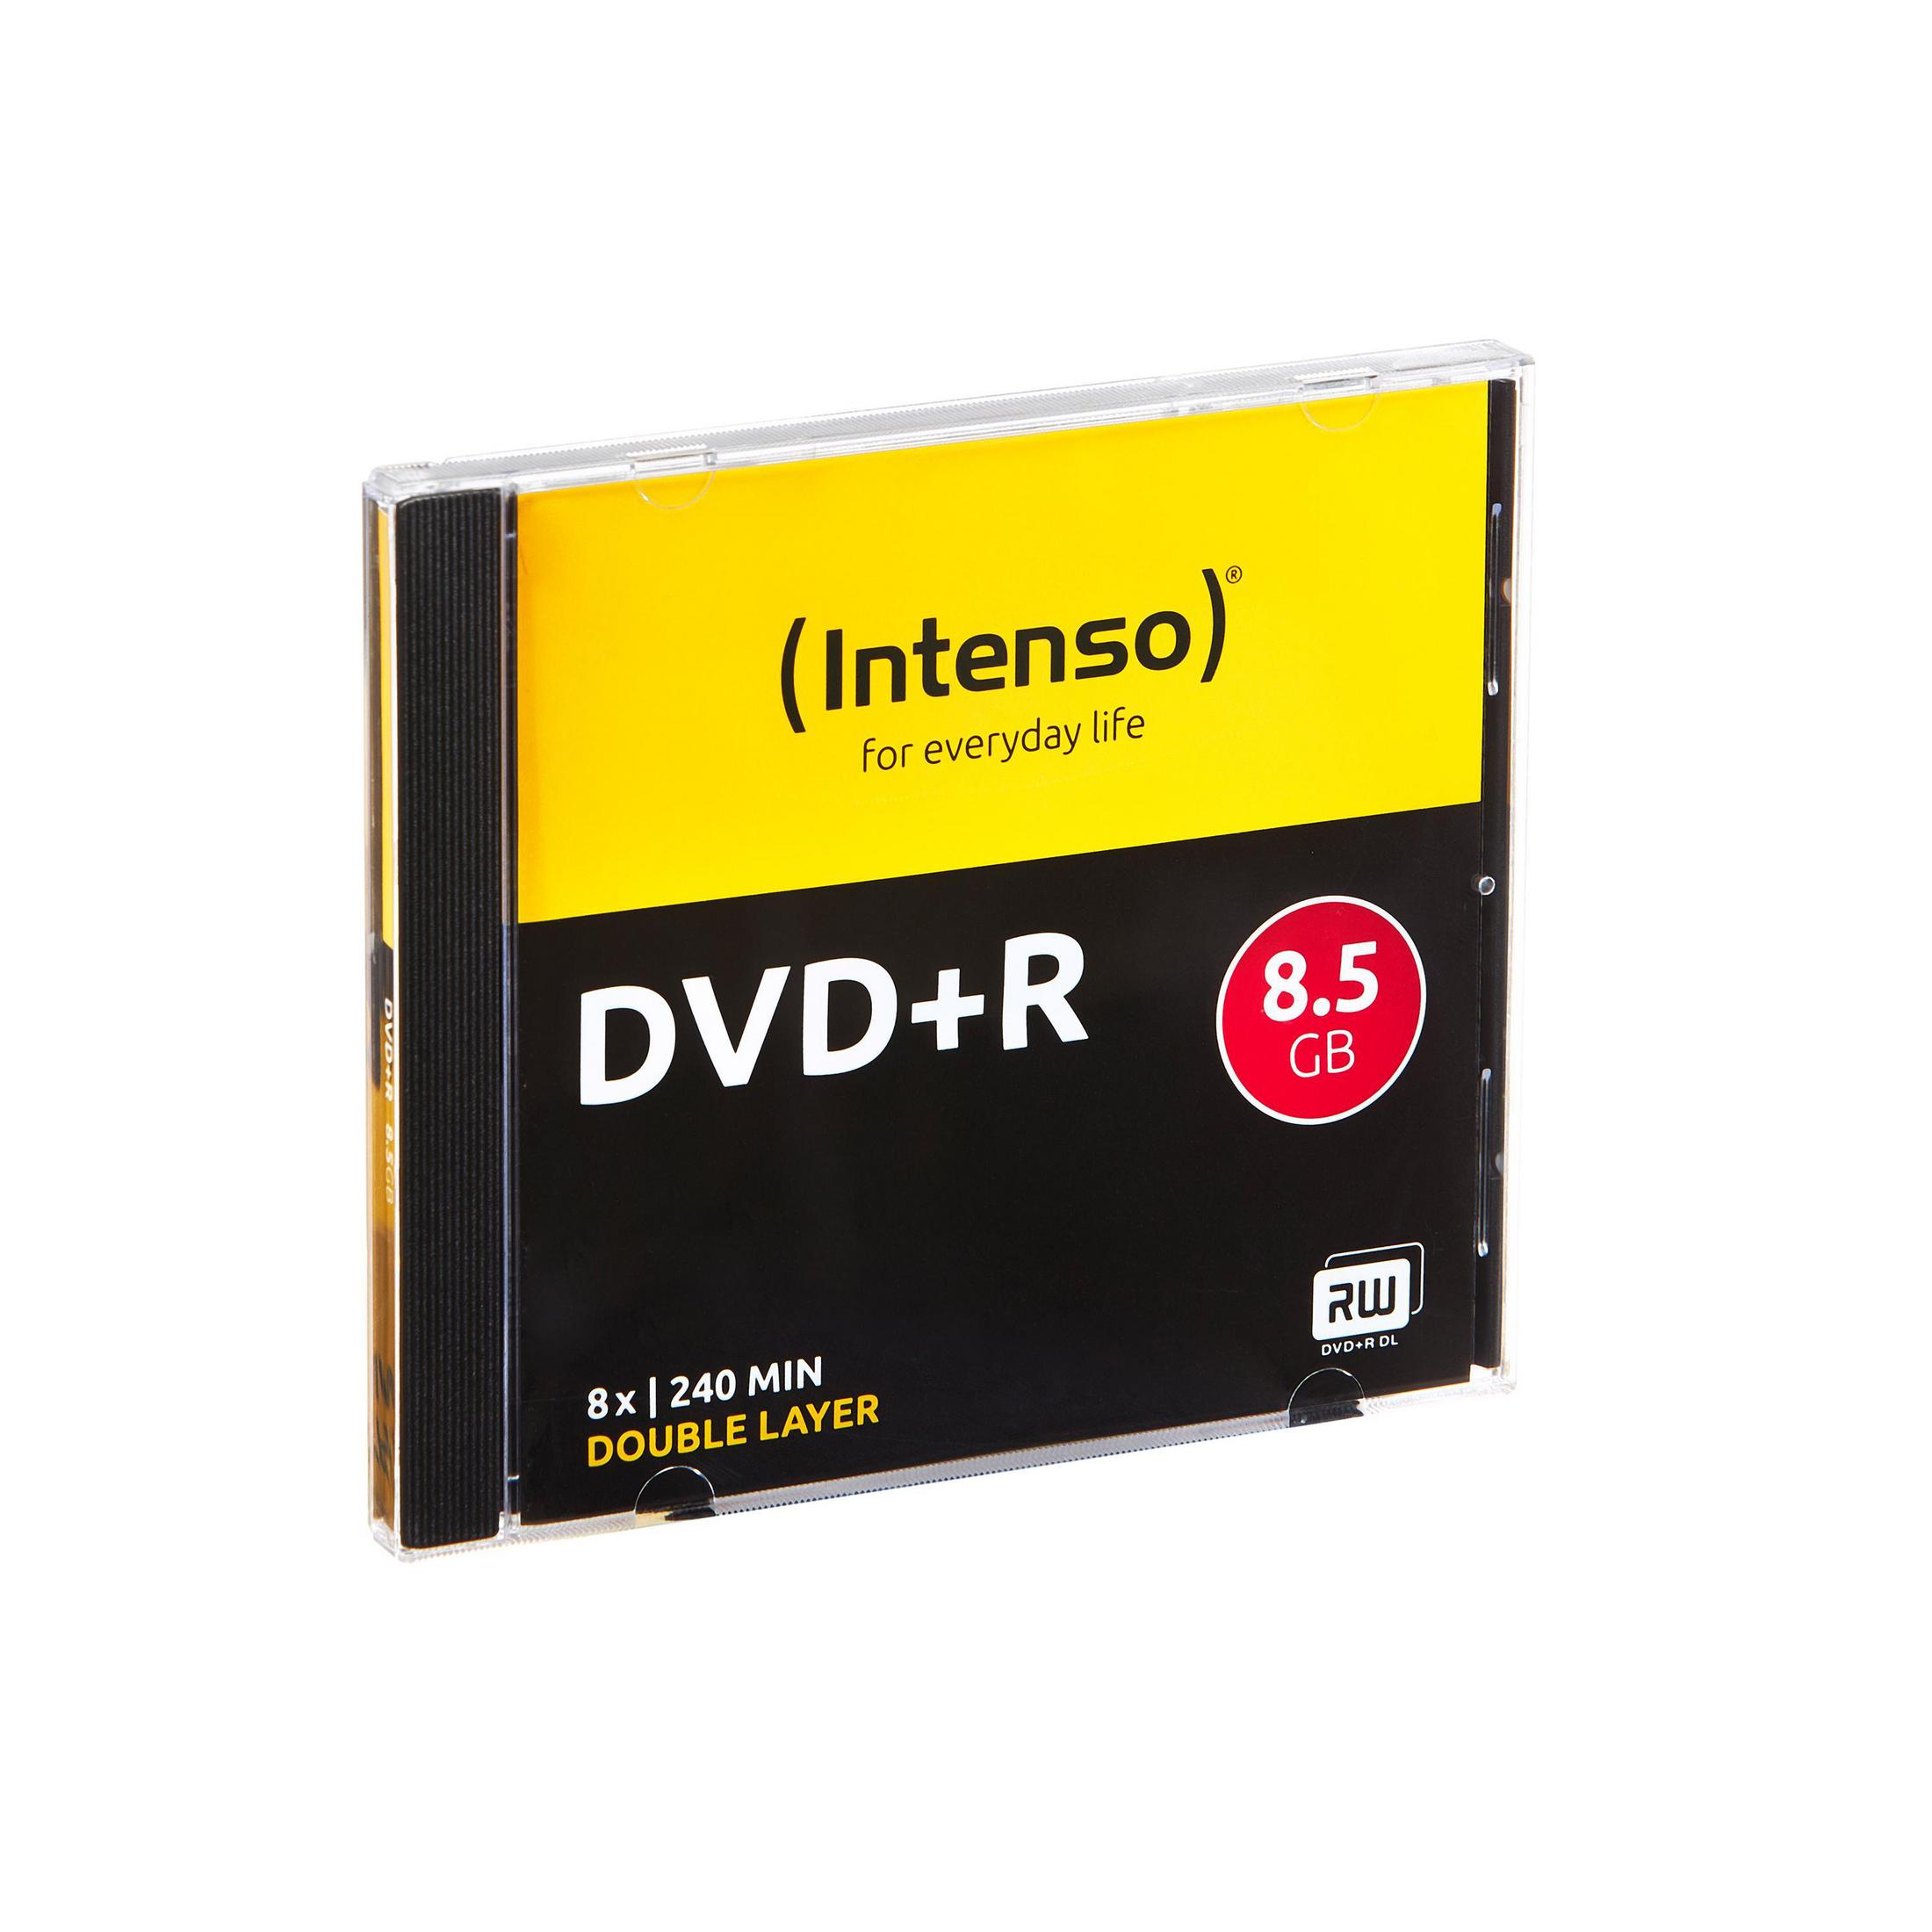 INTENSO Double DVD+R 5ER DVD+R JC DL 8X 4311245 Layer Rohlinge